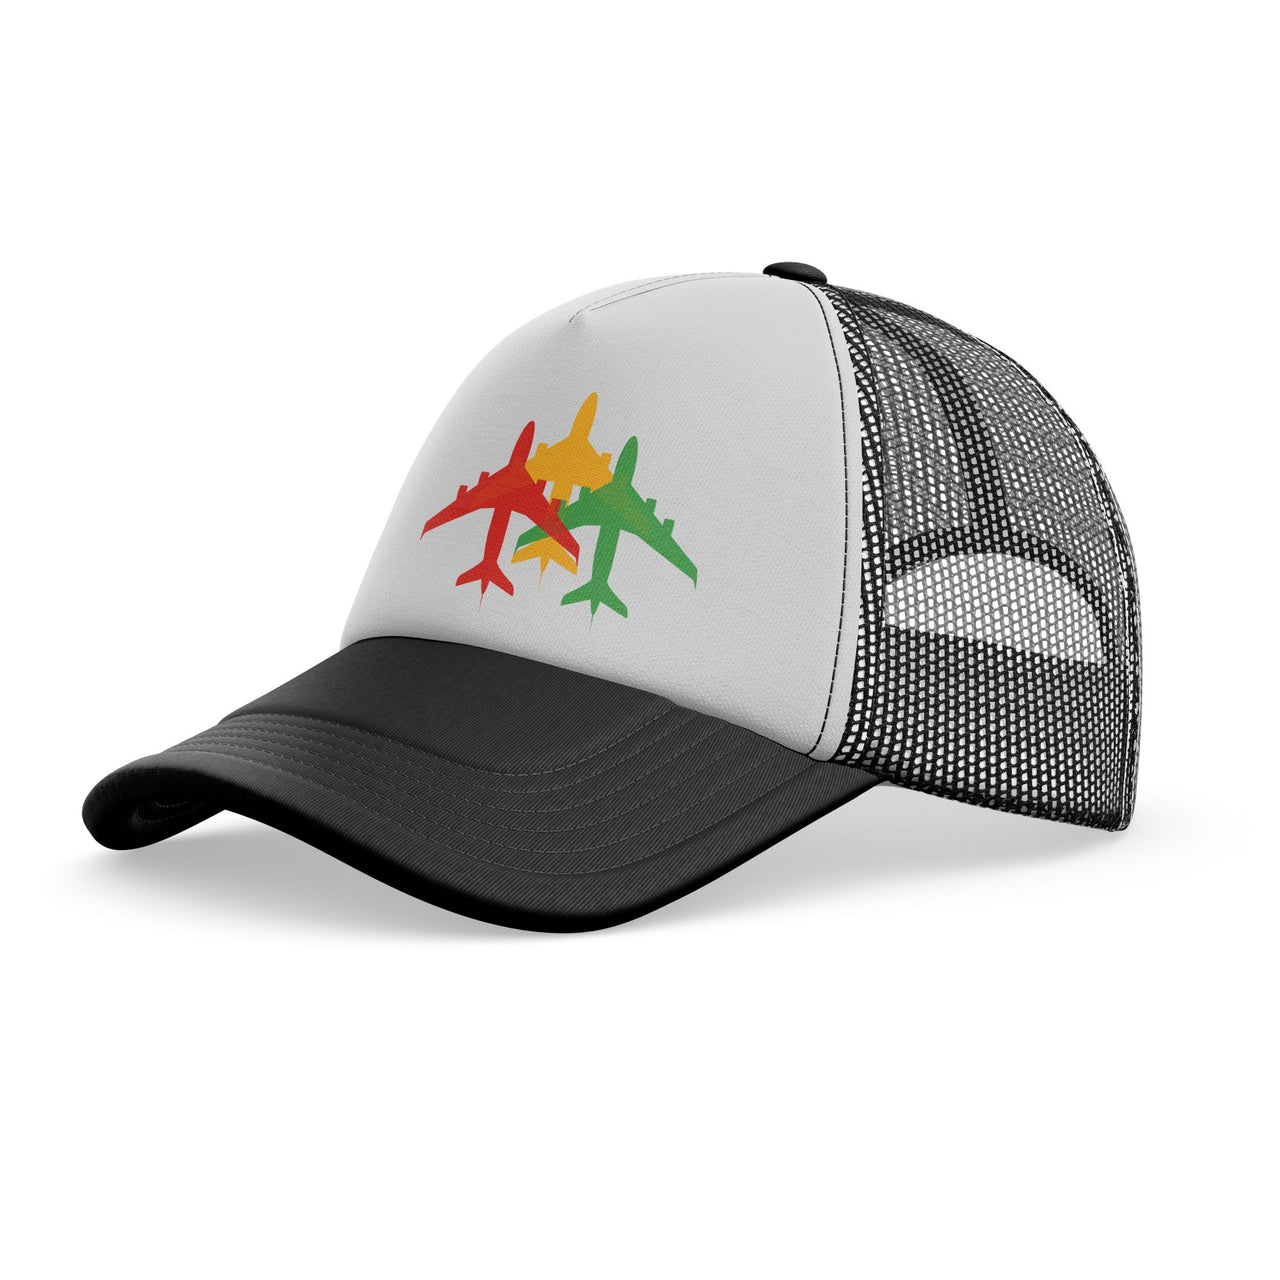 Colourful 3 Airplanes Designed Trucker Caps & Hats